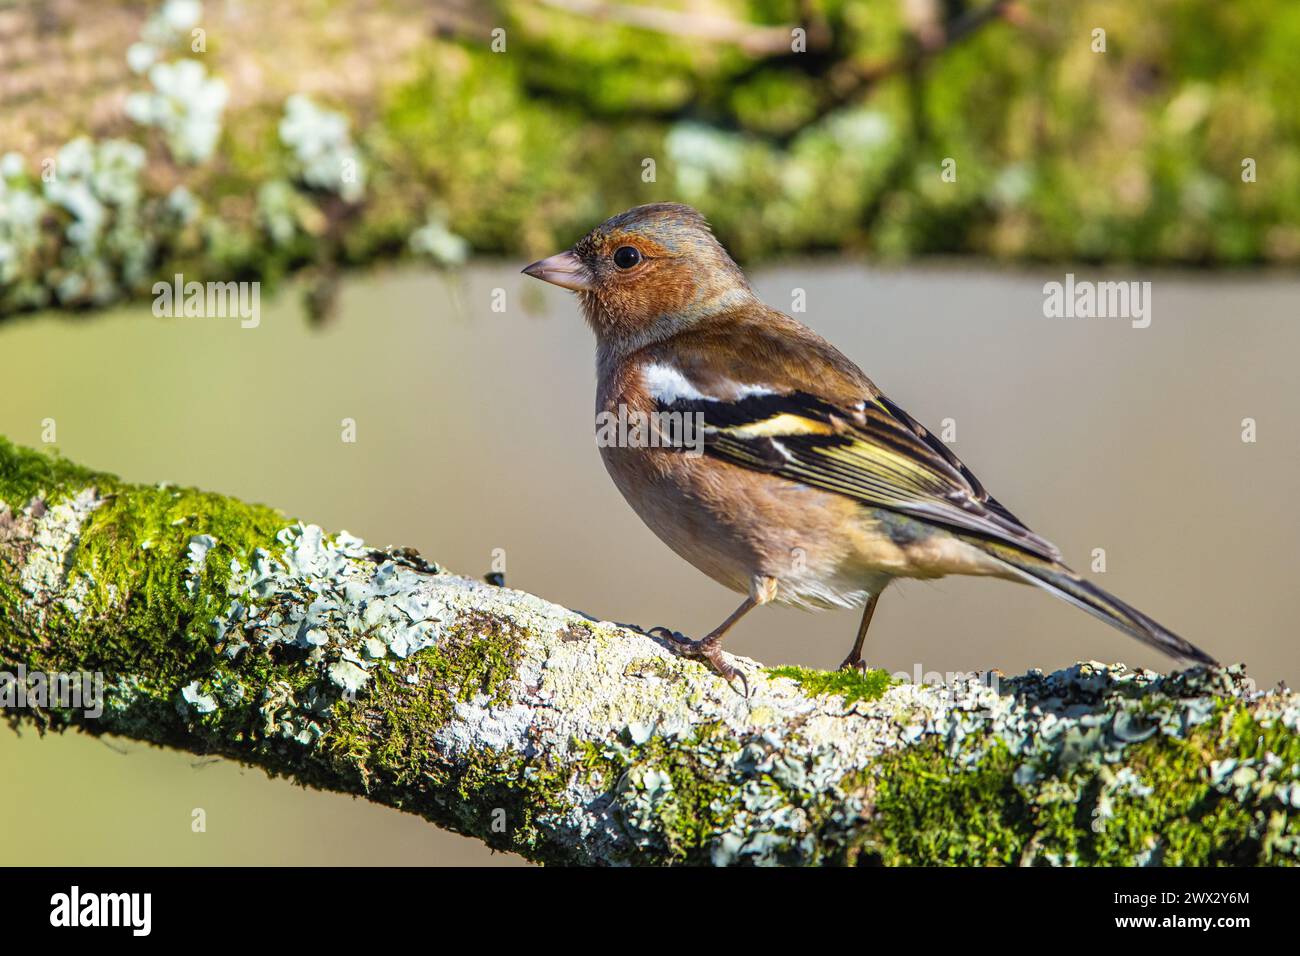 Male of Chaffinch, Fringilla coelebs, bird in forest at winter sun Stock Photo